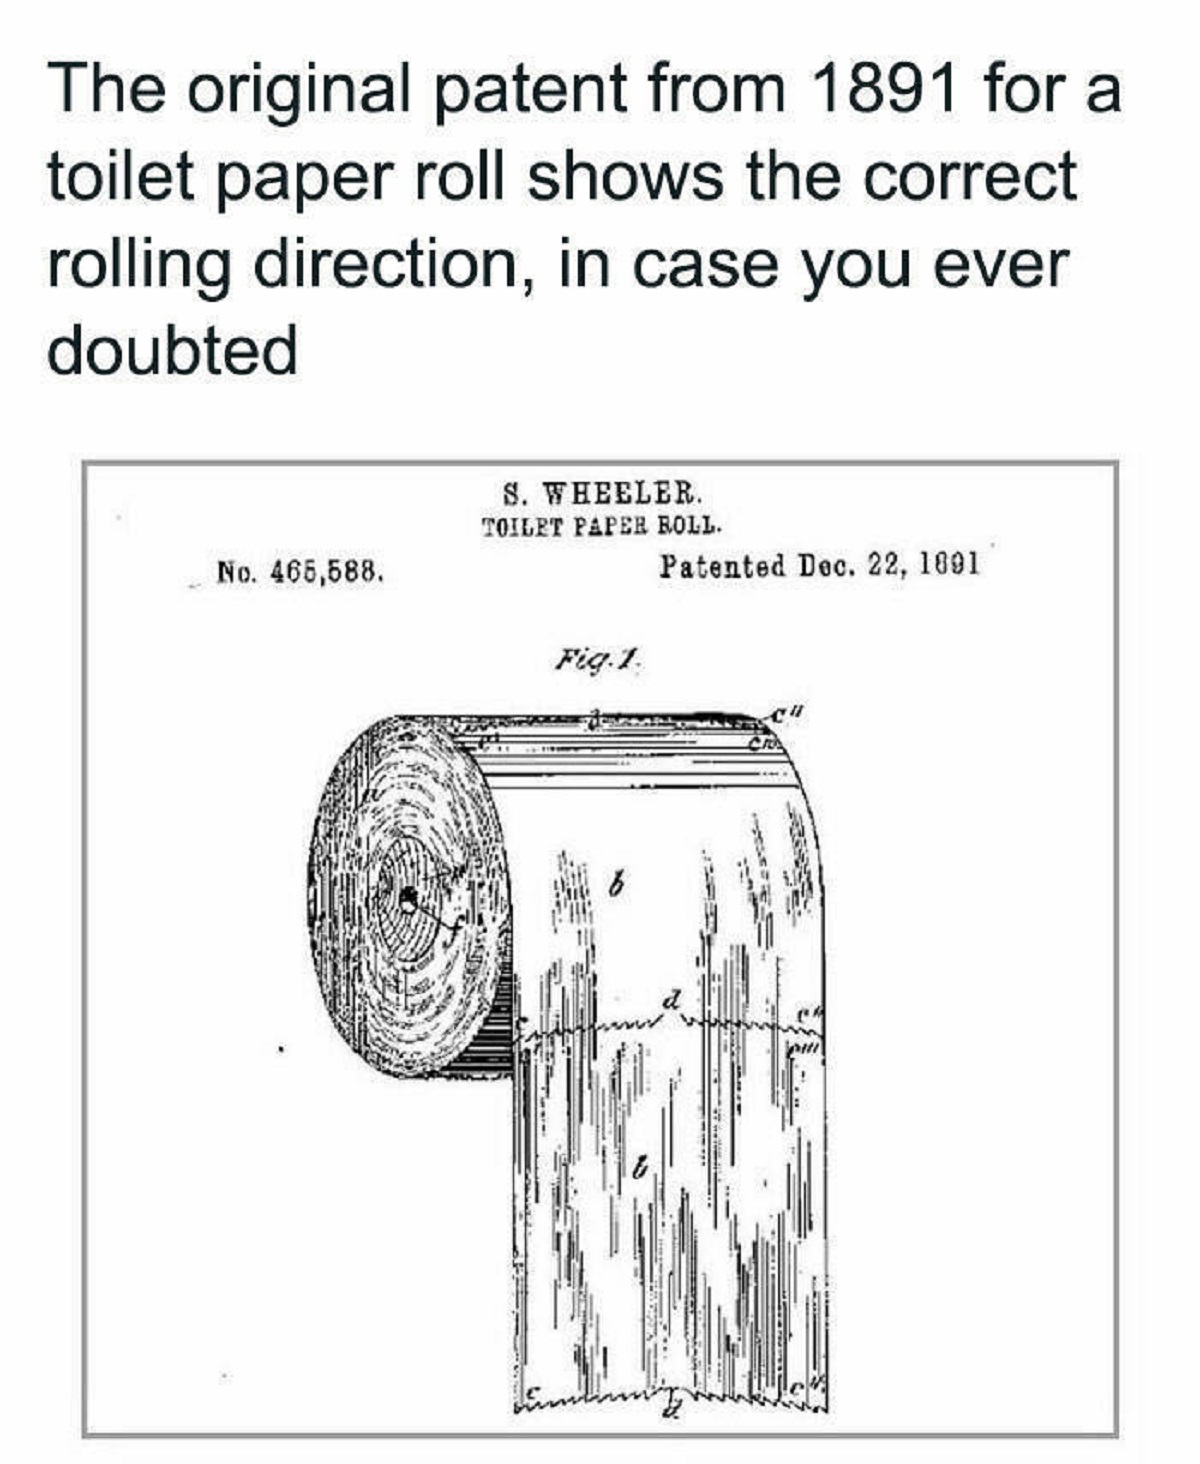 s wheeler toilet paper roll - The original patent from 1891 for a toilet paper roll shows the correct rolling direction, in case you ever doubted No. 465,588. S. Wheeler. Toilet Paper Roll. Fig.1. Patented Dec. 22, 1891